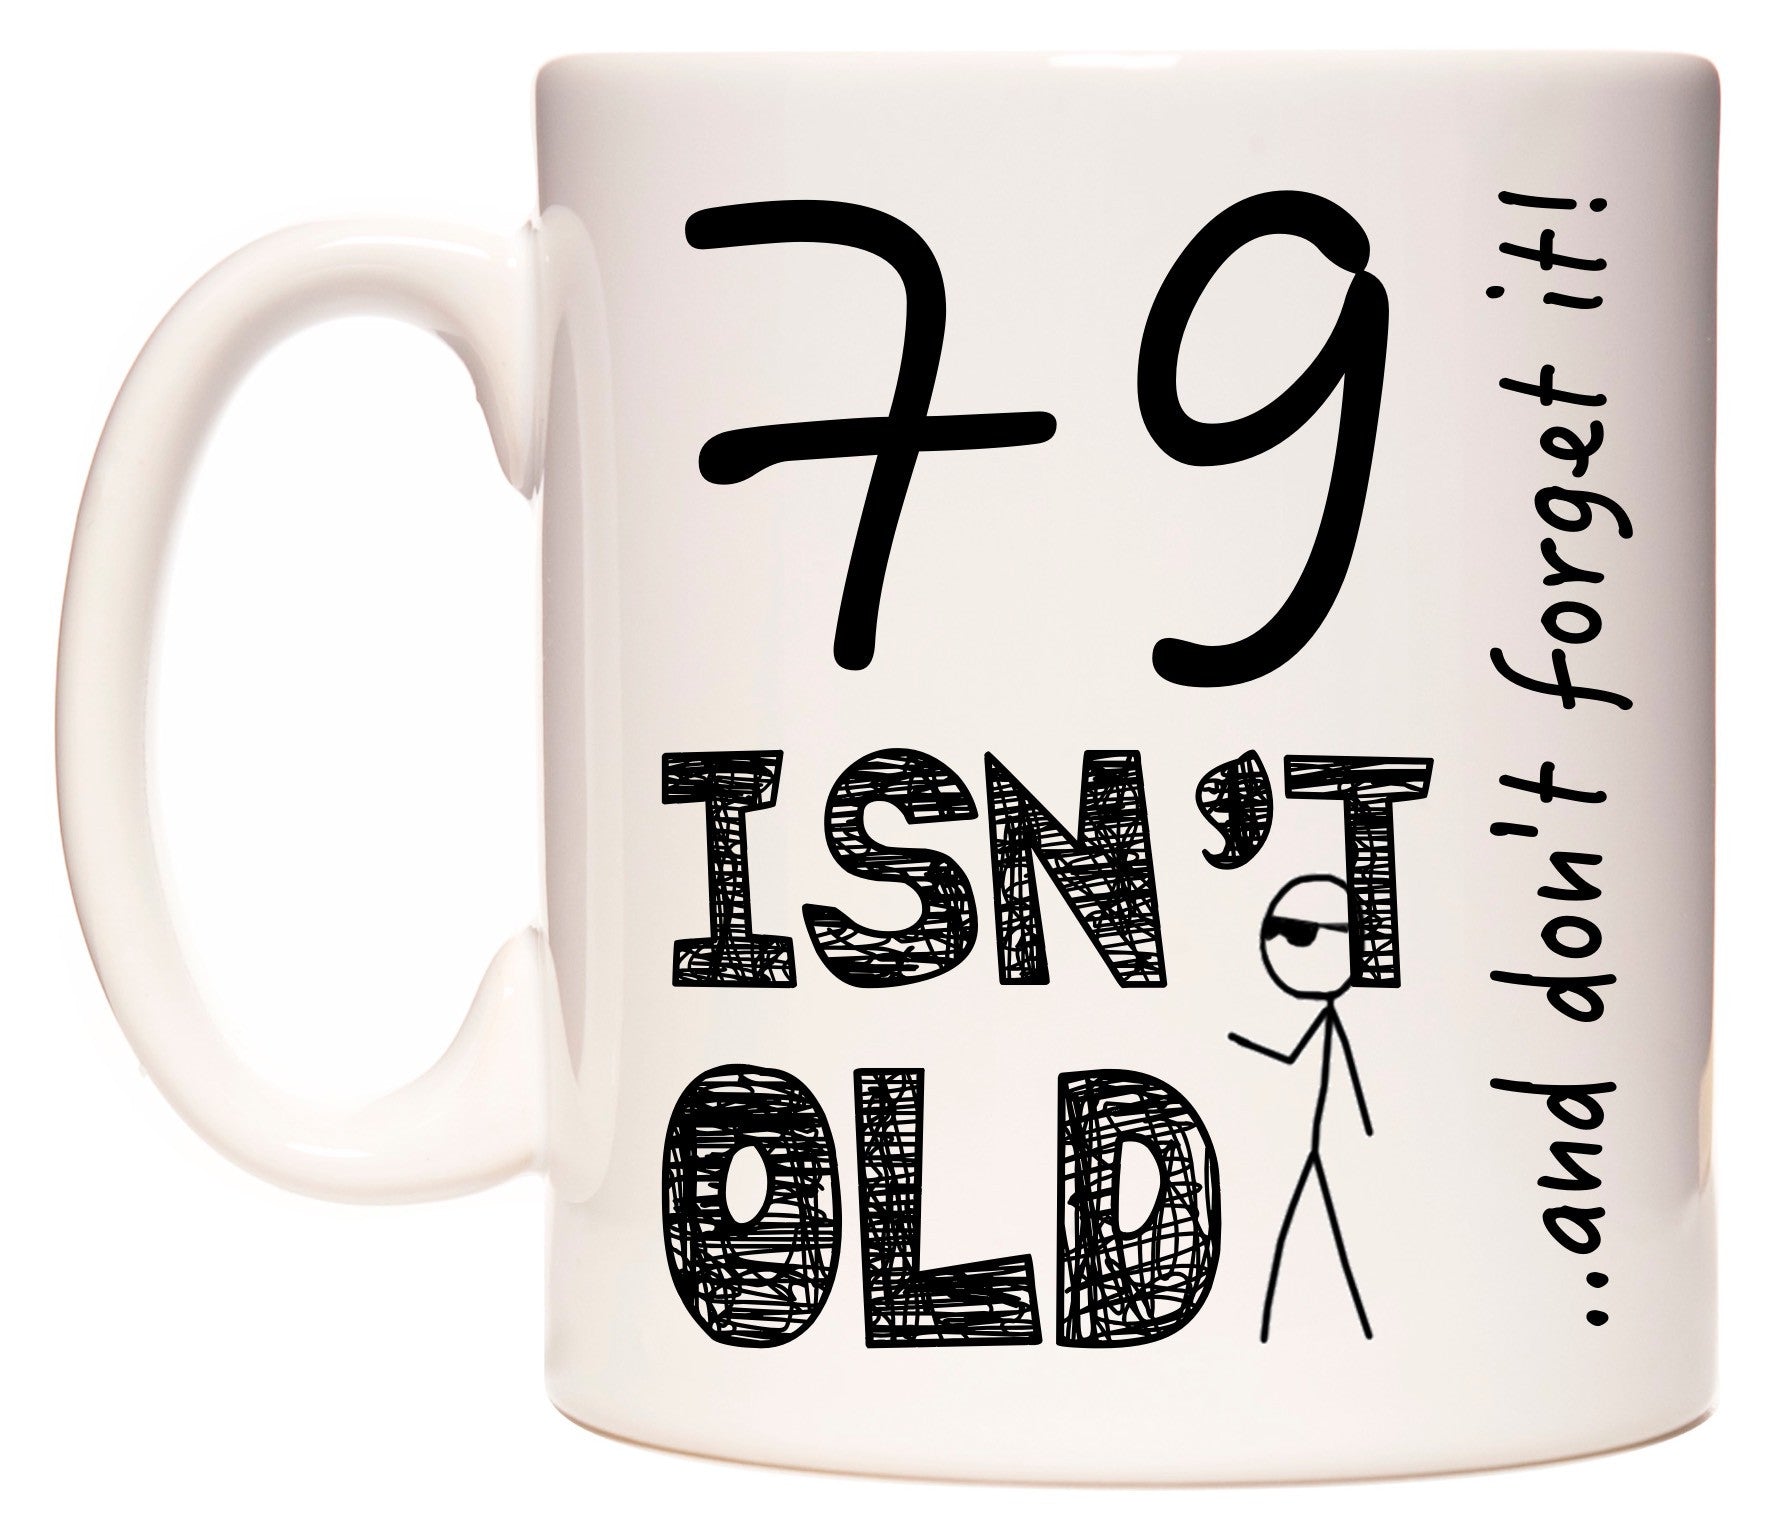 This mug features 79 Isn't Old